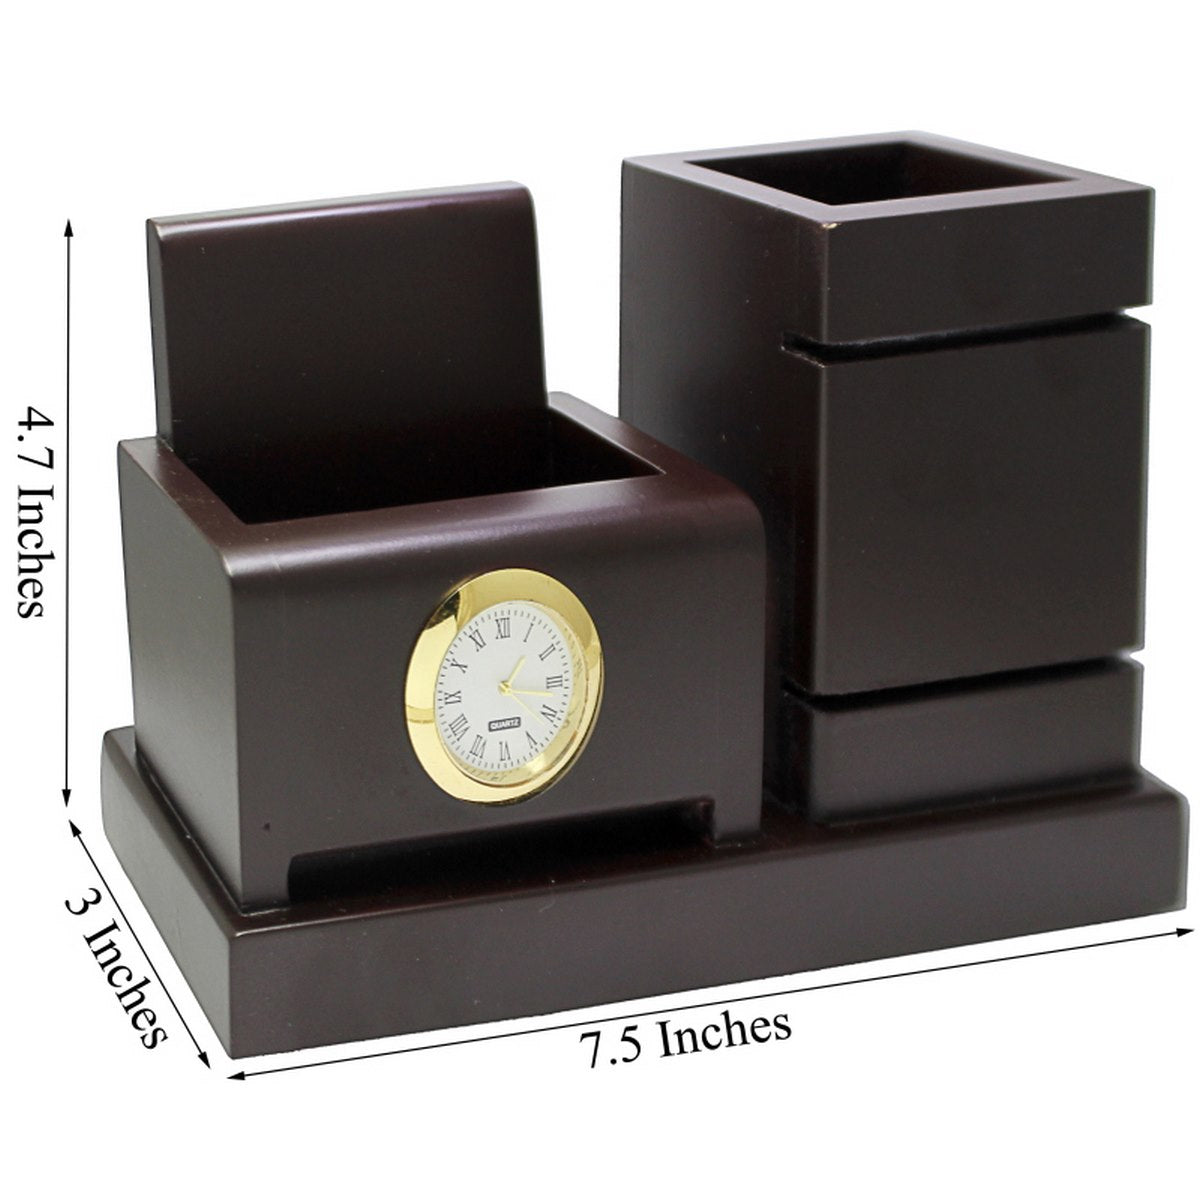 Dark Brown Multipurpose Wooden Pen Stand with Clock - For Corporate Gifting, Events Promotional Freebie JAJP32